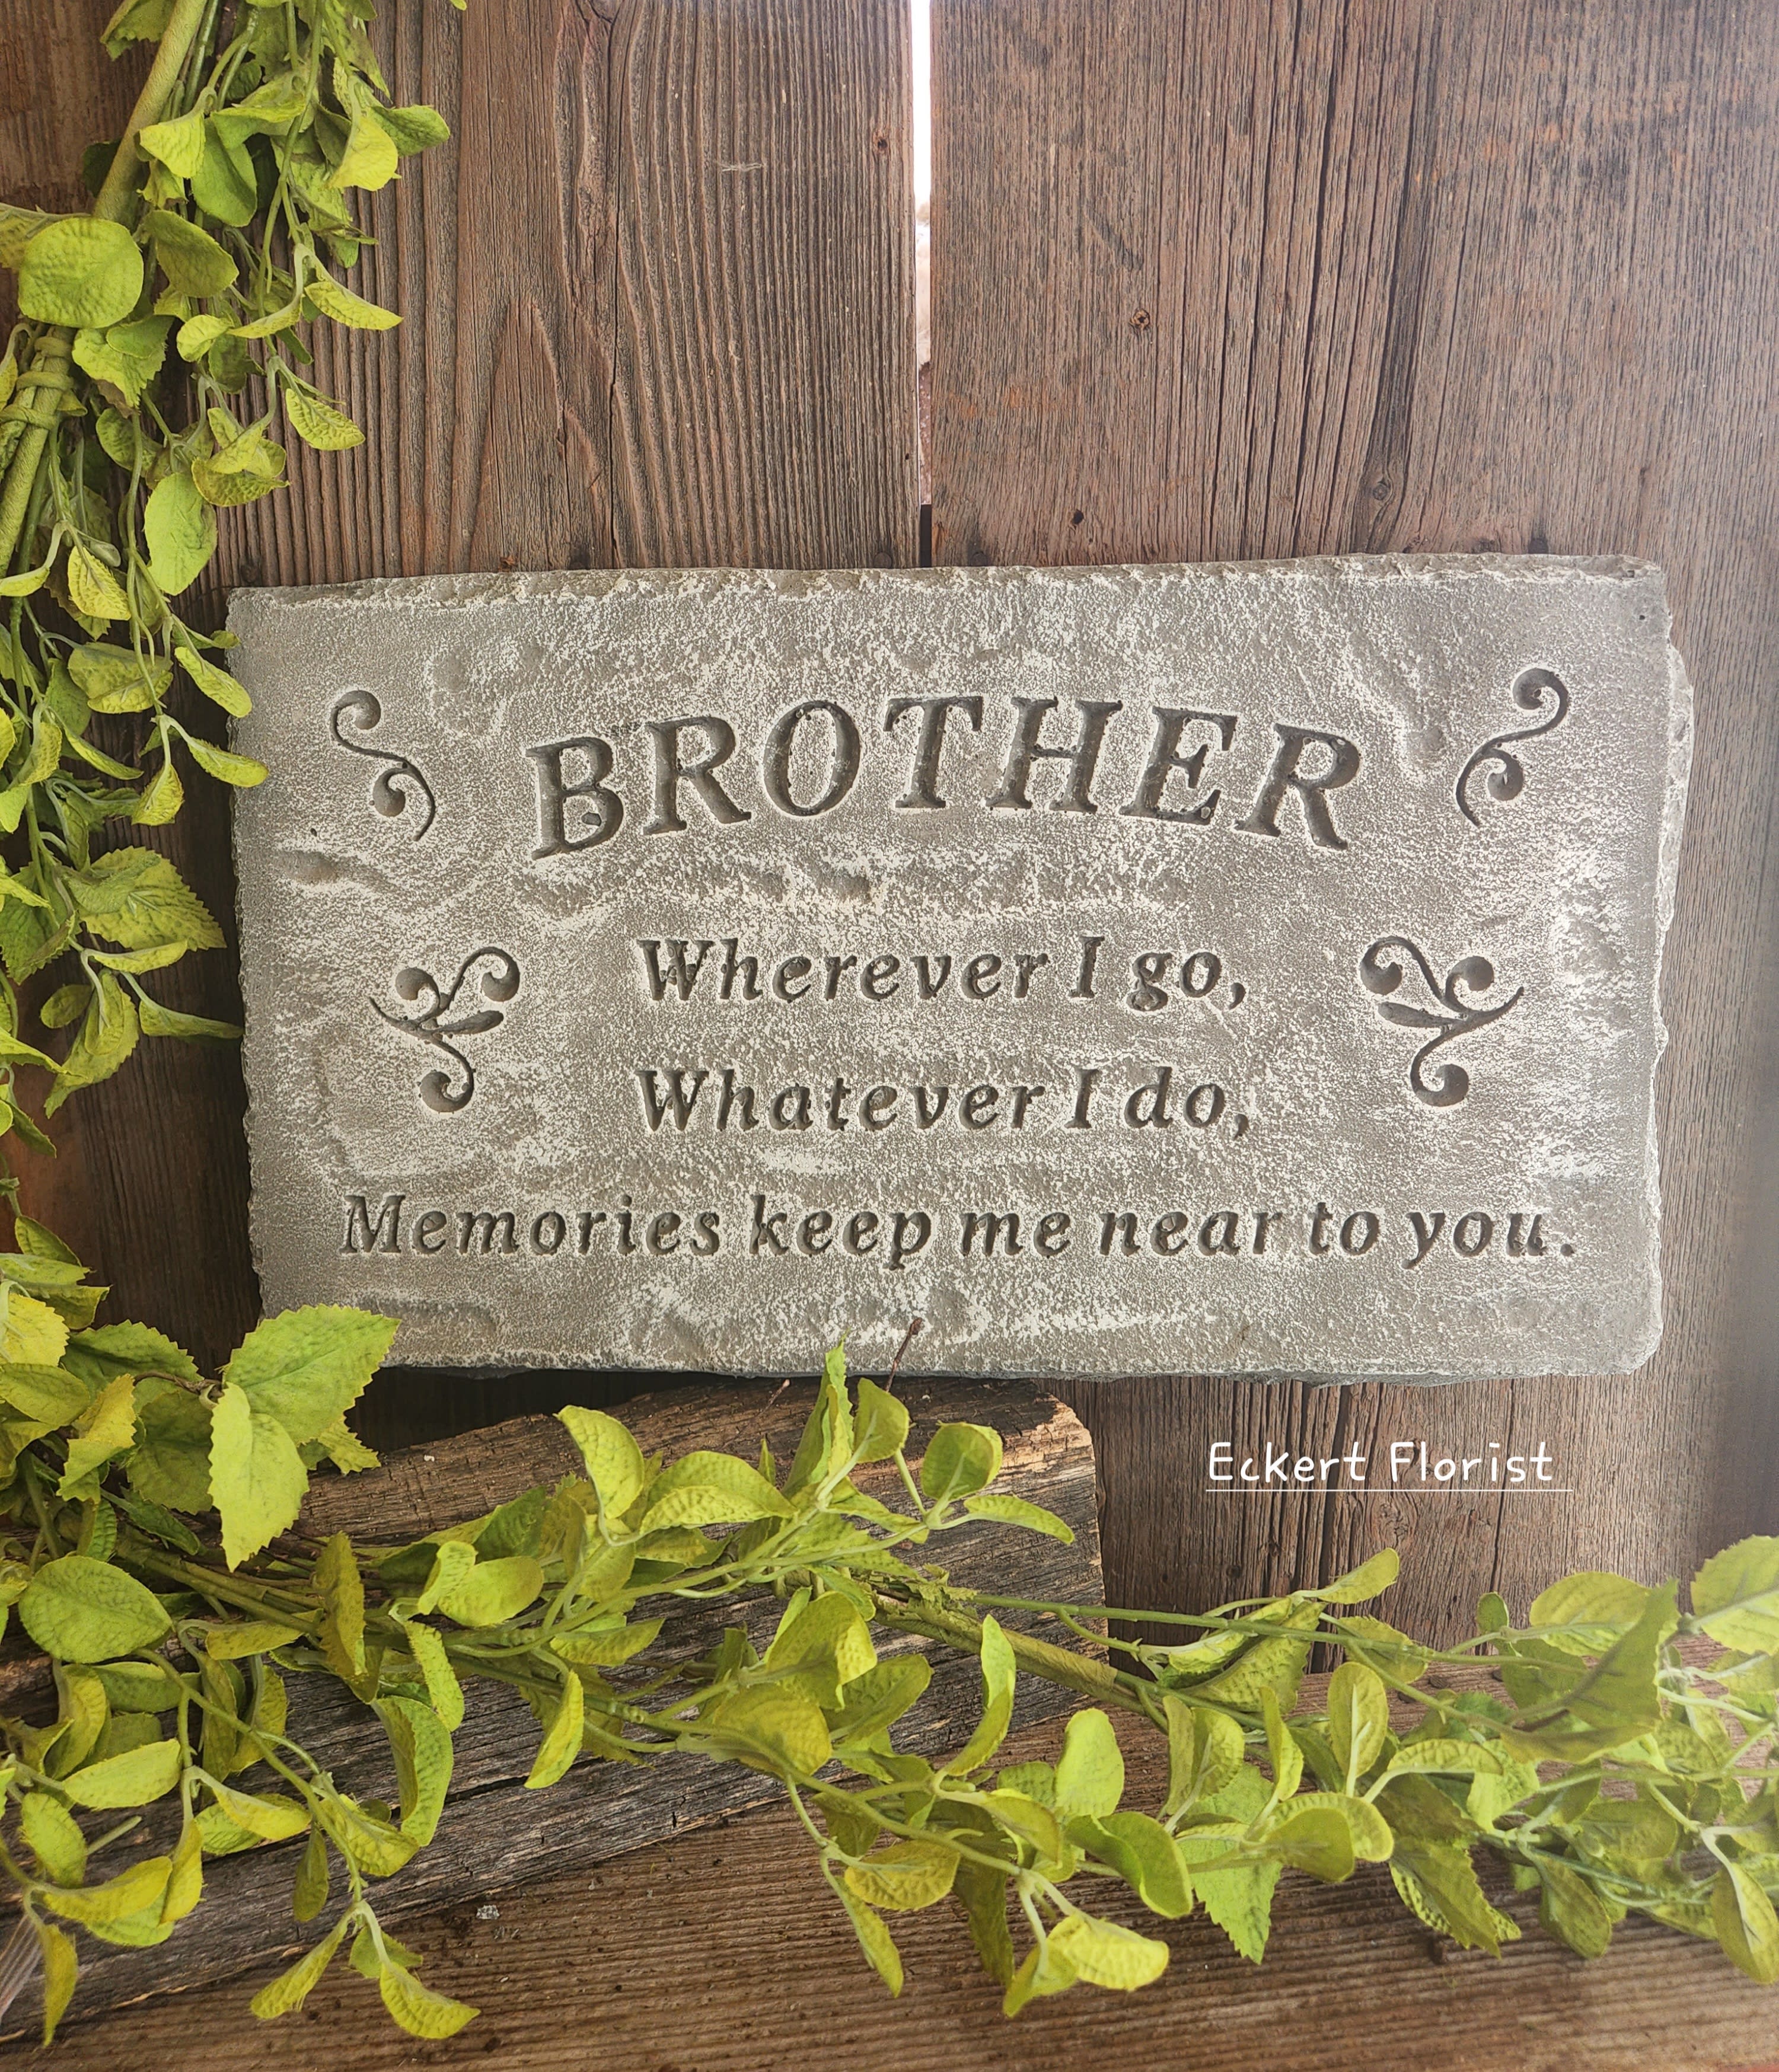 Eckert Florist's &quot;Brother...&quot; Memorial Stone - *Our Local Delivery Only &quot;Brother - Wherever I go, Whatever I do, Memories keep me near to you.&quot; Cement Stone measures approx. 10&quot; H X 17.5&quot; W *Stand Included *Upgrade with artificial flowers. See Deluxe option. ALL OF OUR STONES COME DECORATED WITH A SHEER BOW, WILLOW, RAFFIA, AND OUR SIGNATURE BIRD.